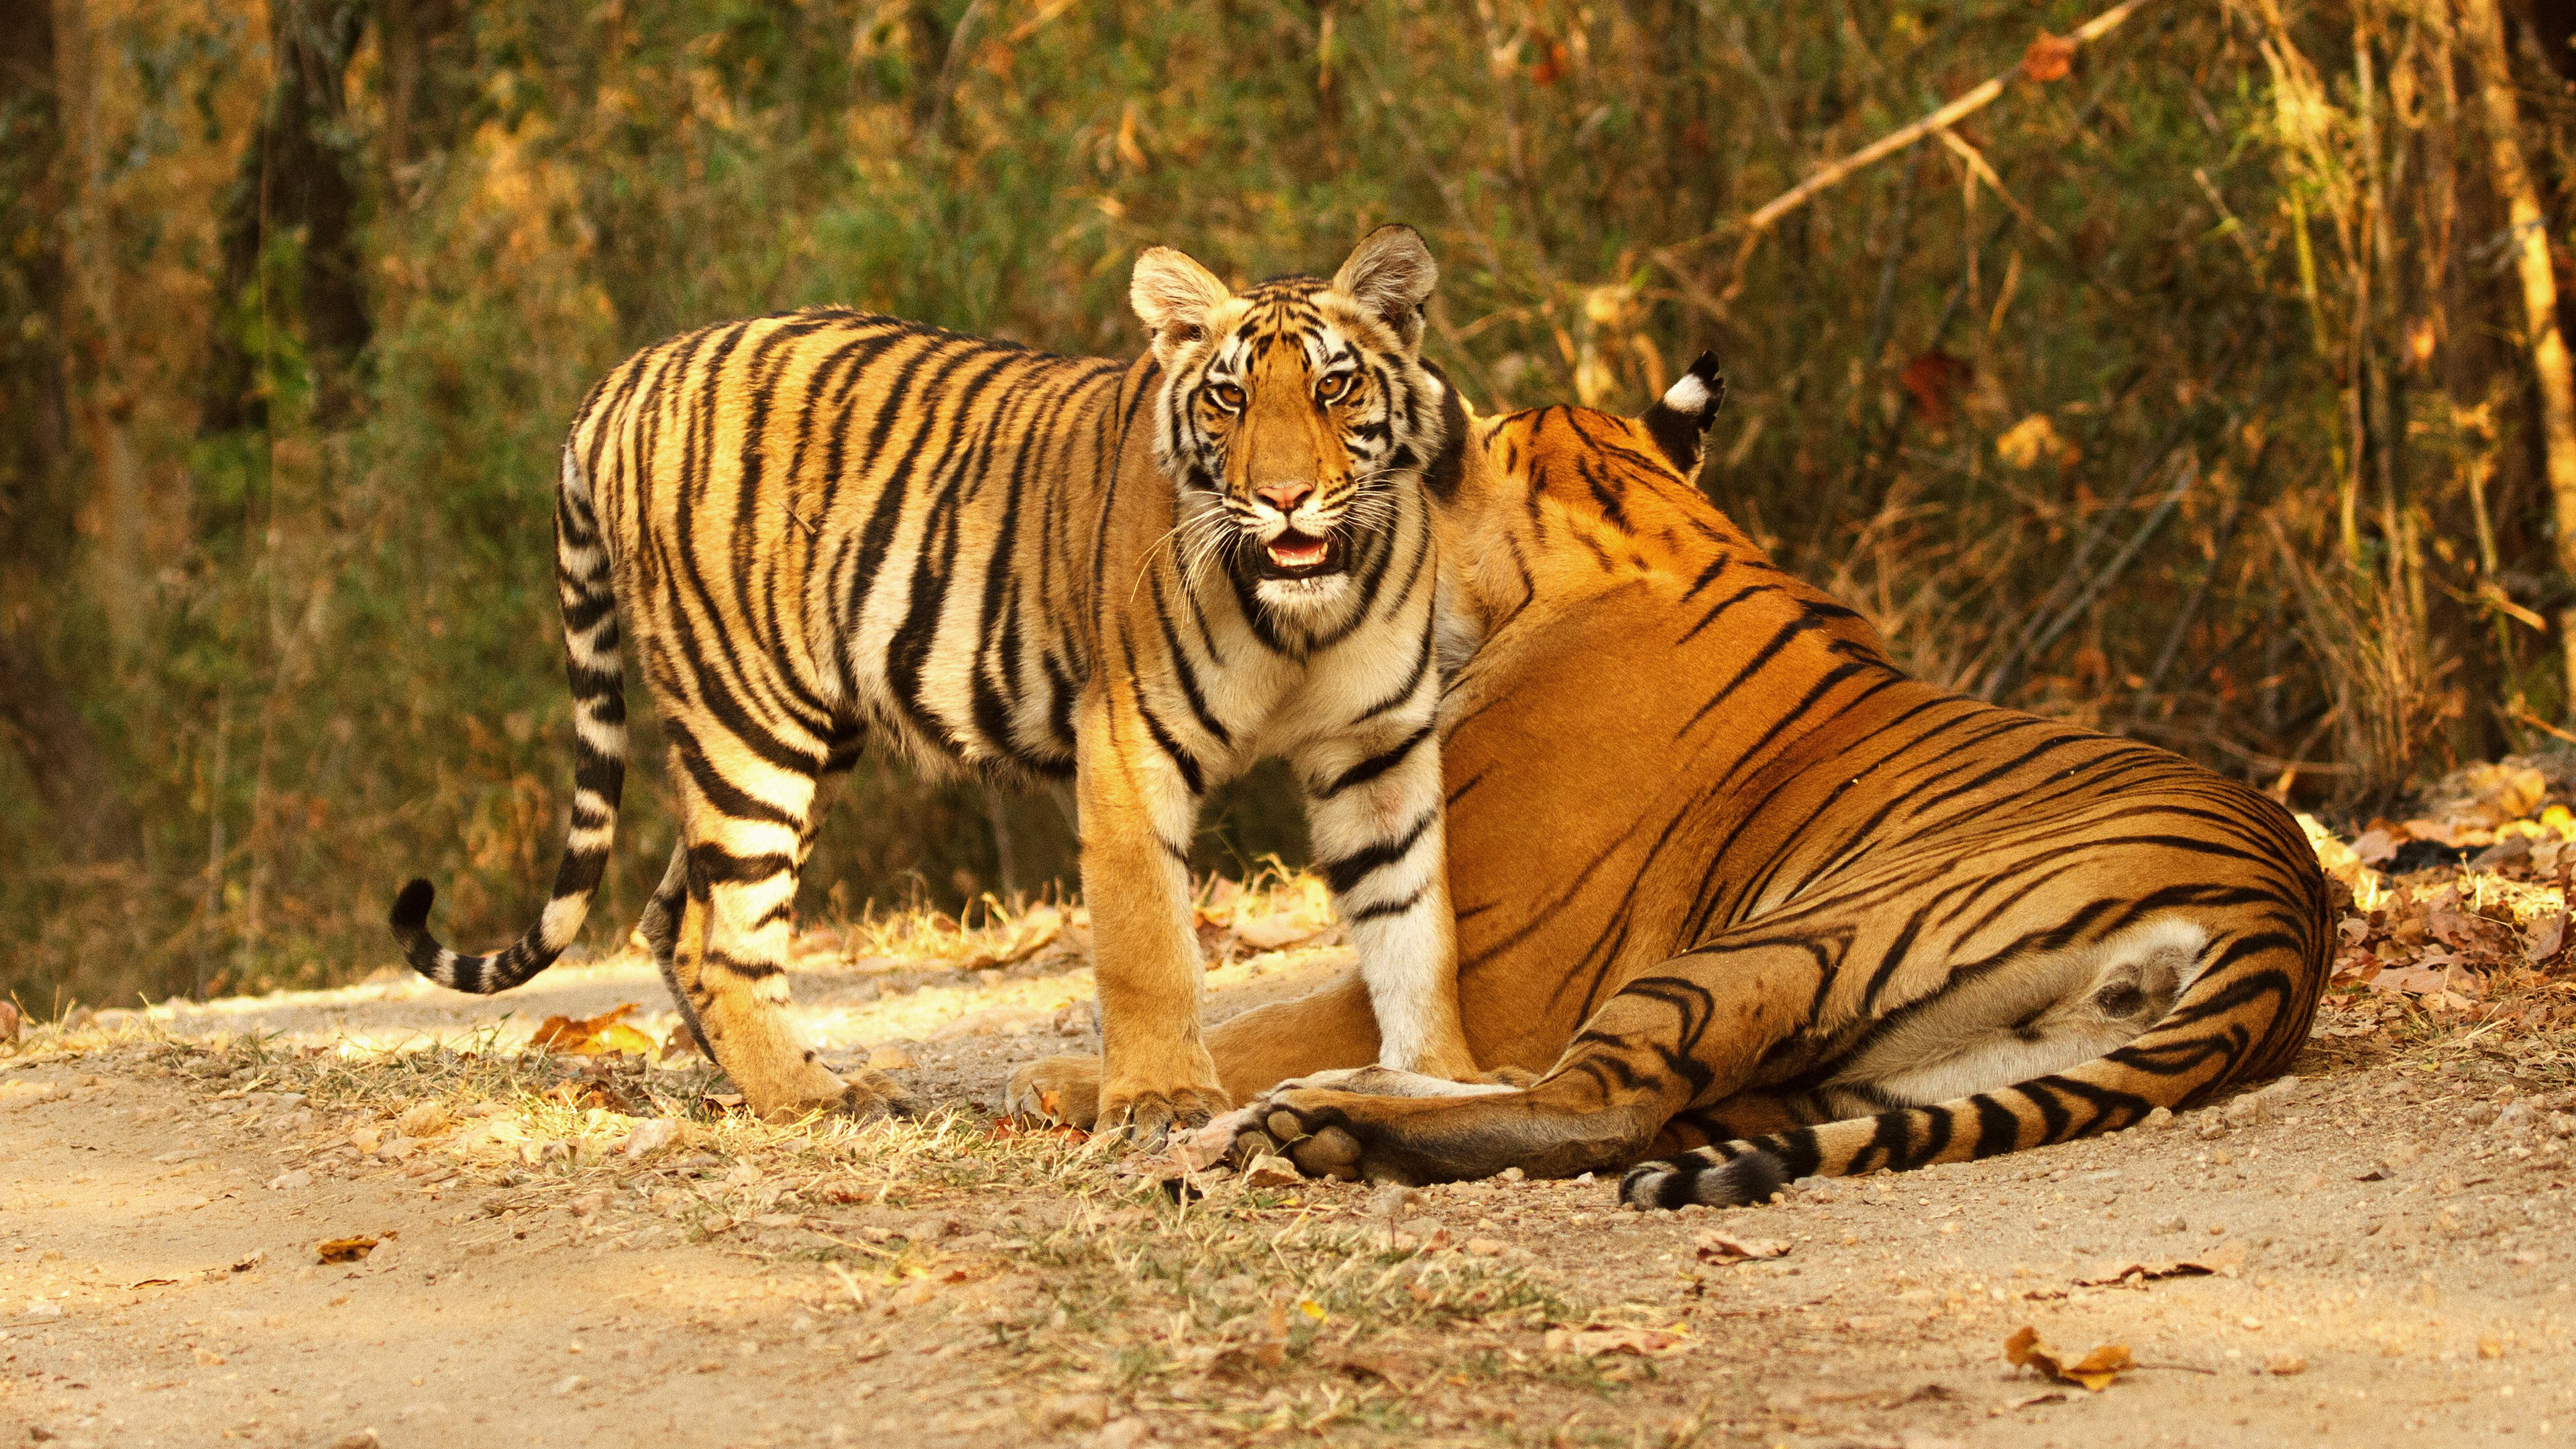 Tiger Is Standing Near Lying Down Tiger During Daytime In The Forest K 2K Animals